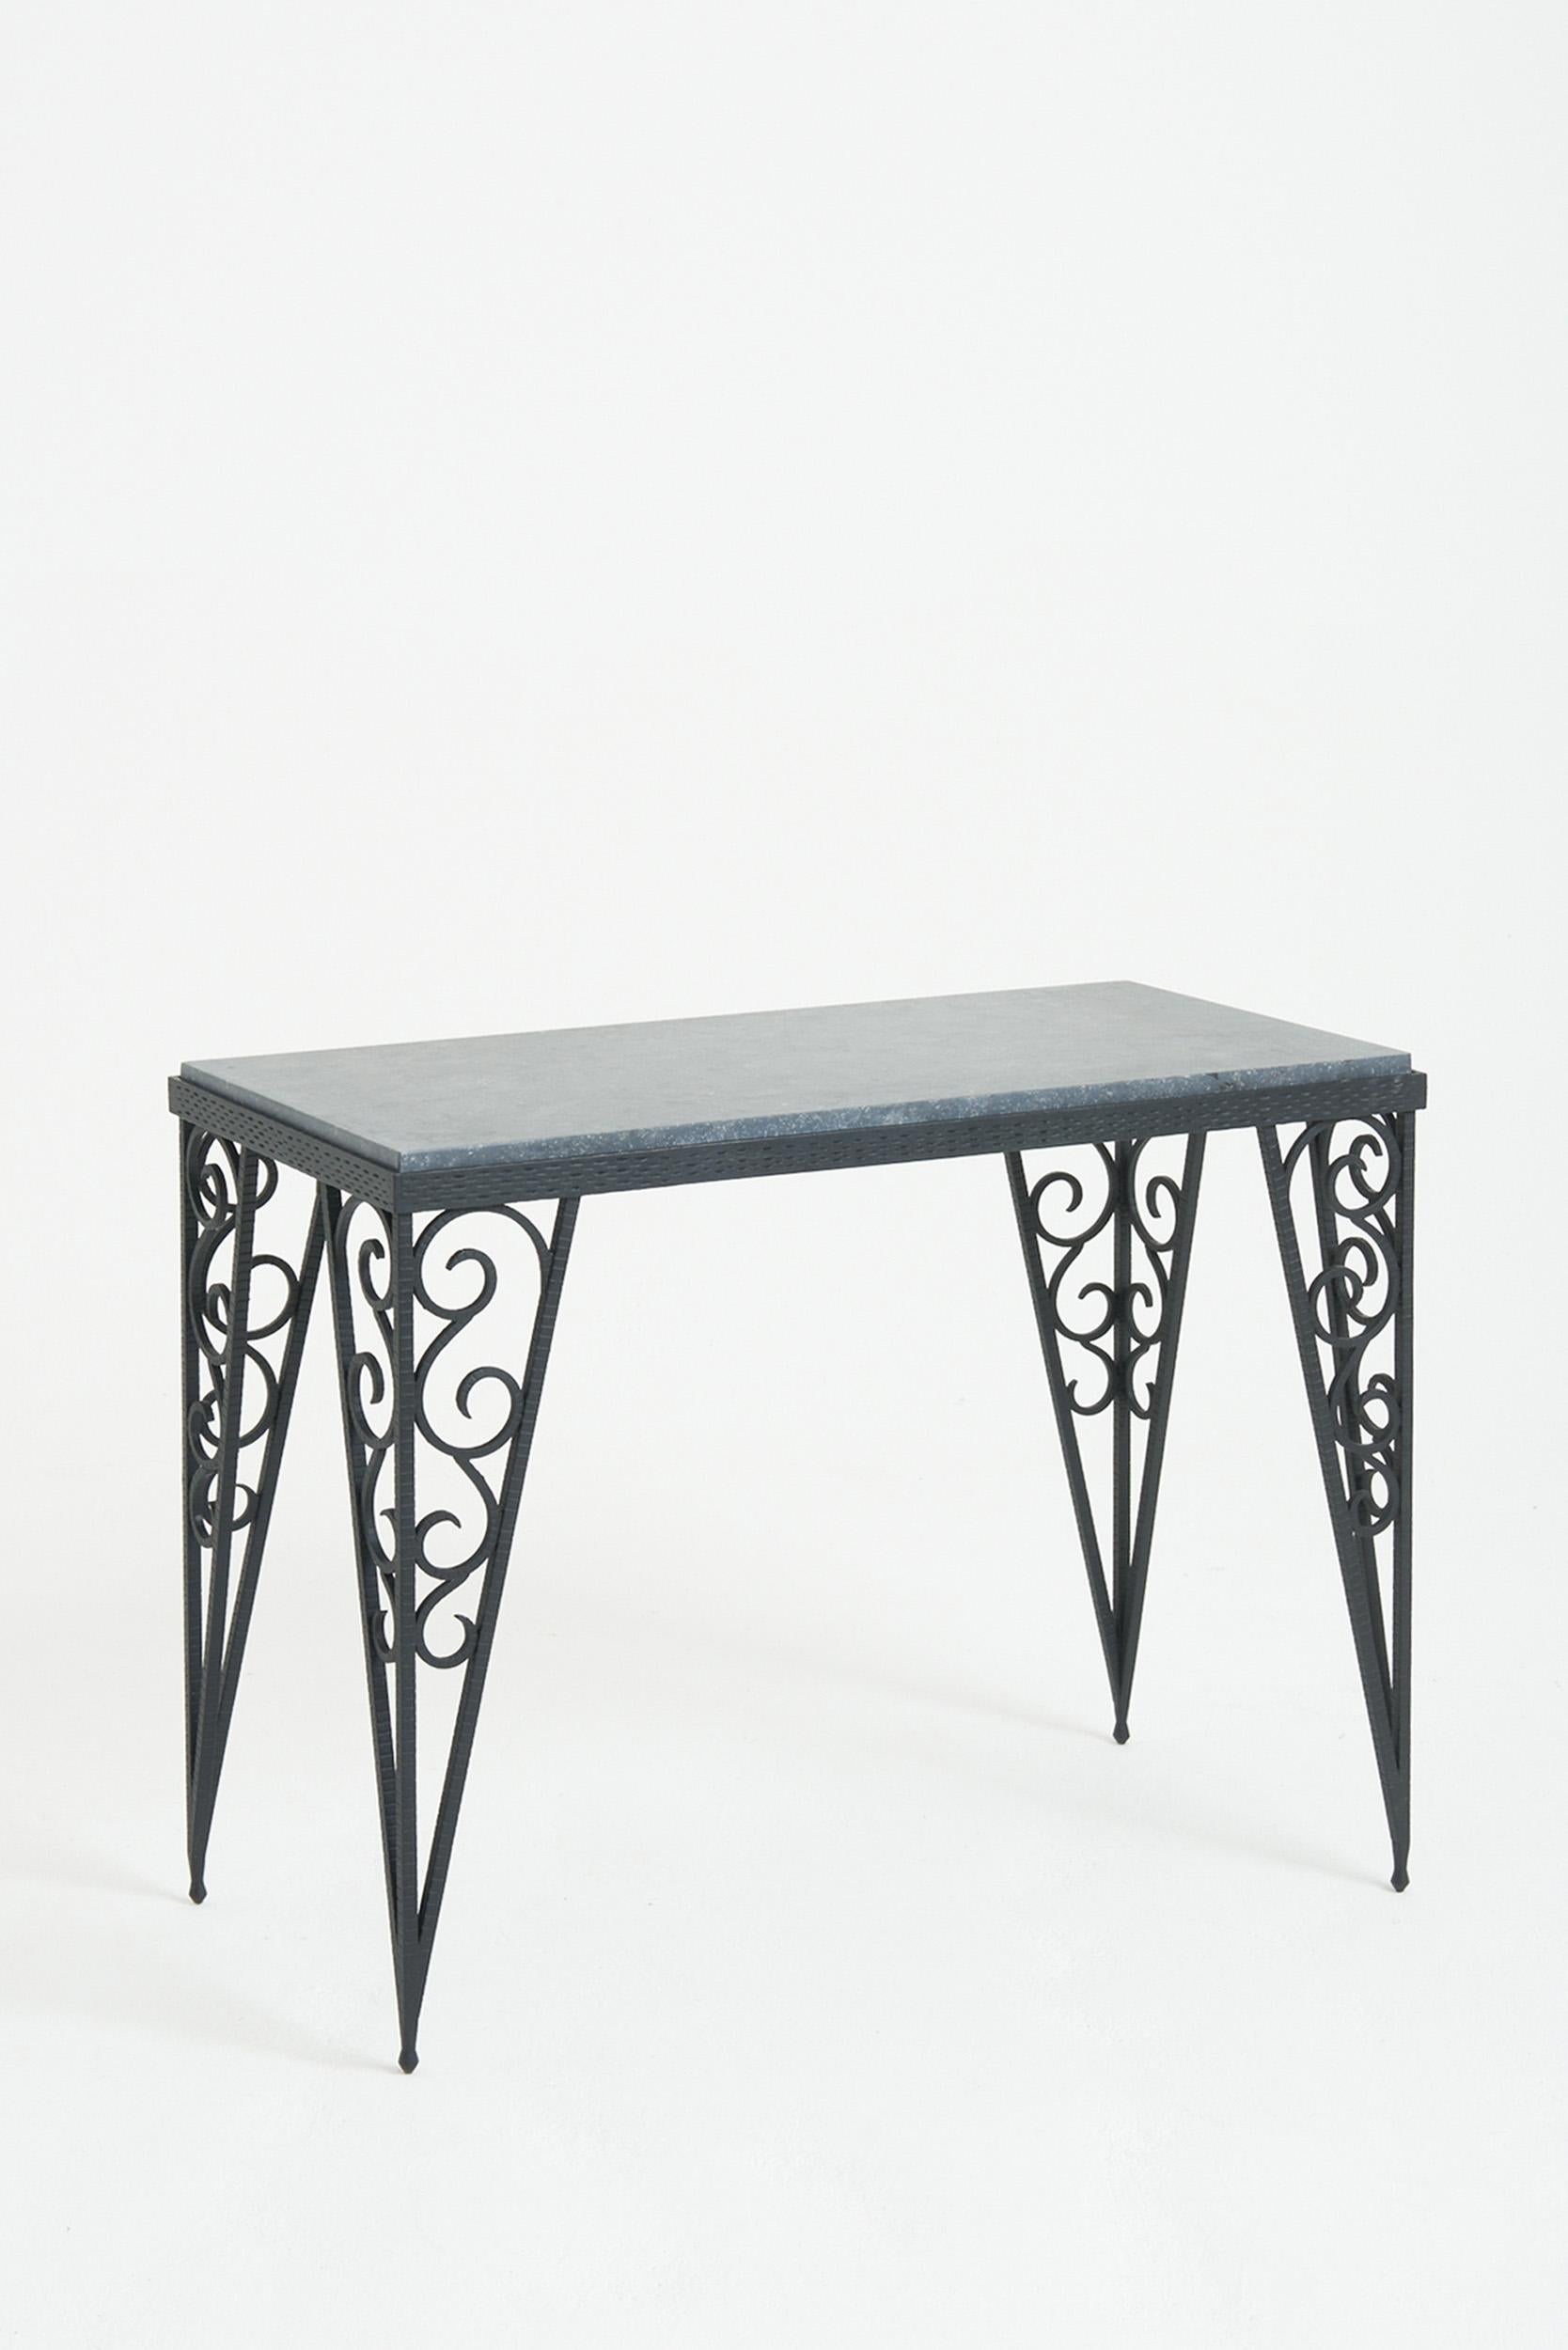 An Art Deco wrought iron console table, with a later Belgian fossil stone top.
France, Circa 1930
71 cm high by 90 cm wide by 45 cm depth